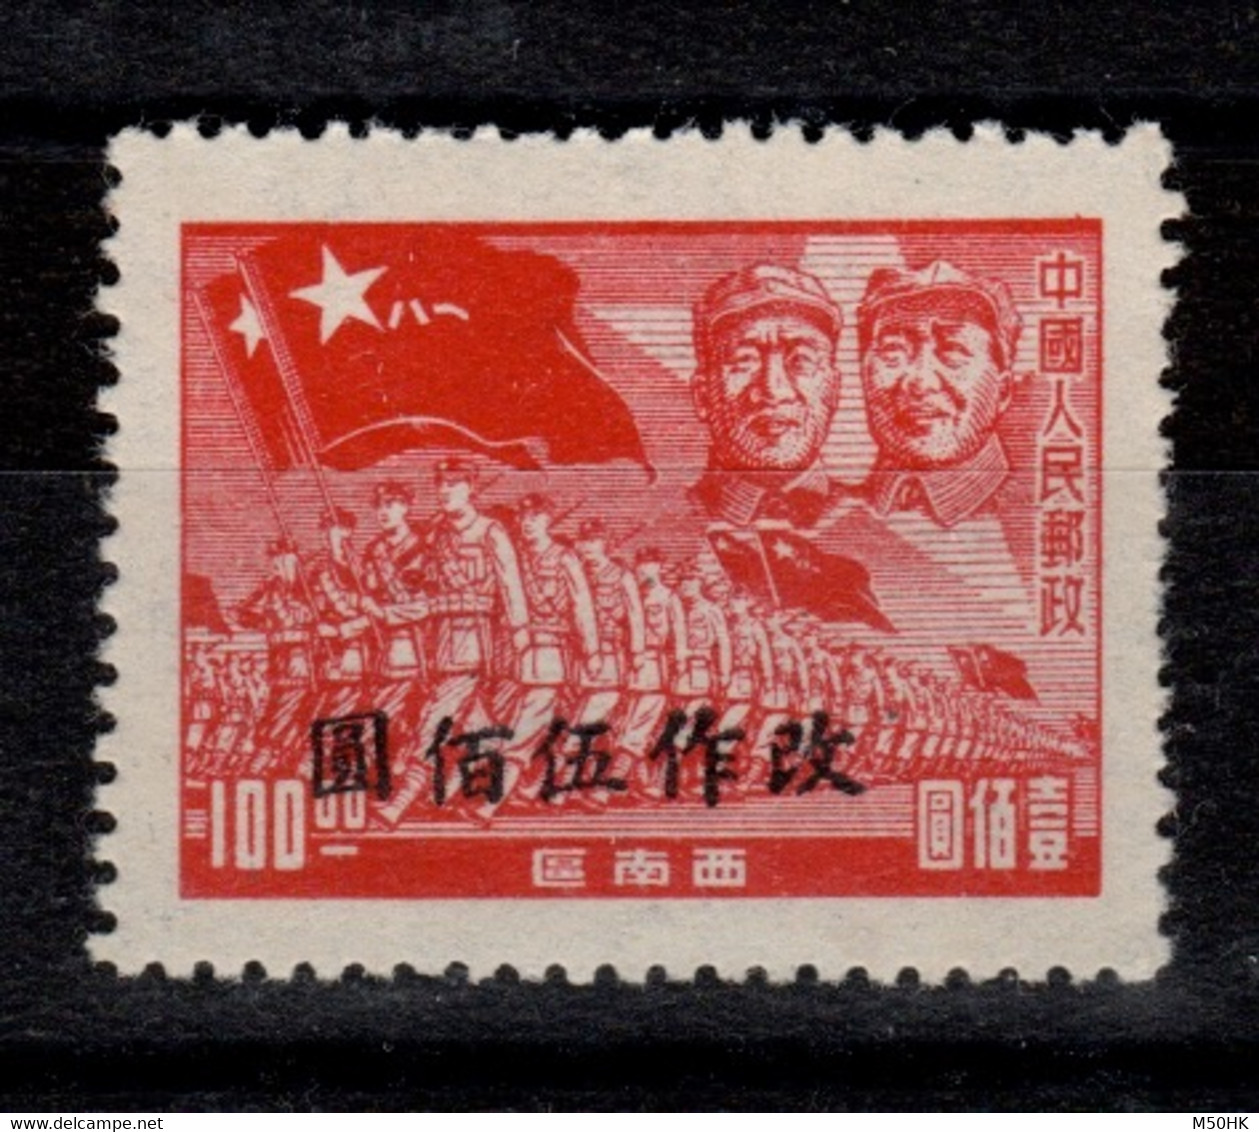 Chine Du Sud Ouest - Timbre Surchargé De 1949 / 1950 NSG MNG As Issued - Zuidwest-China  1949-50